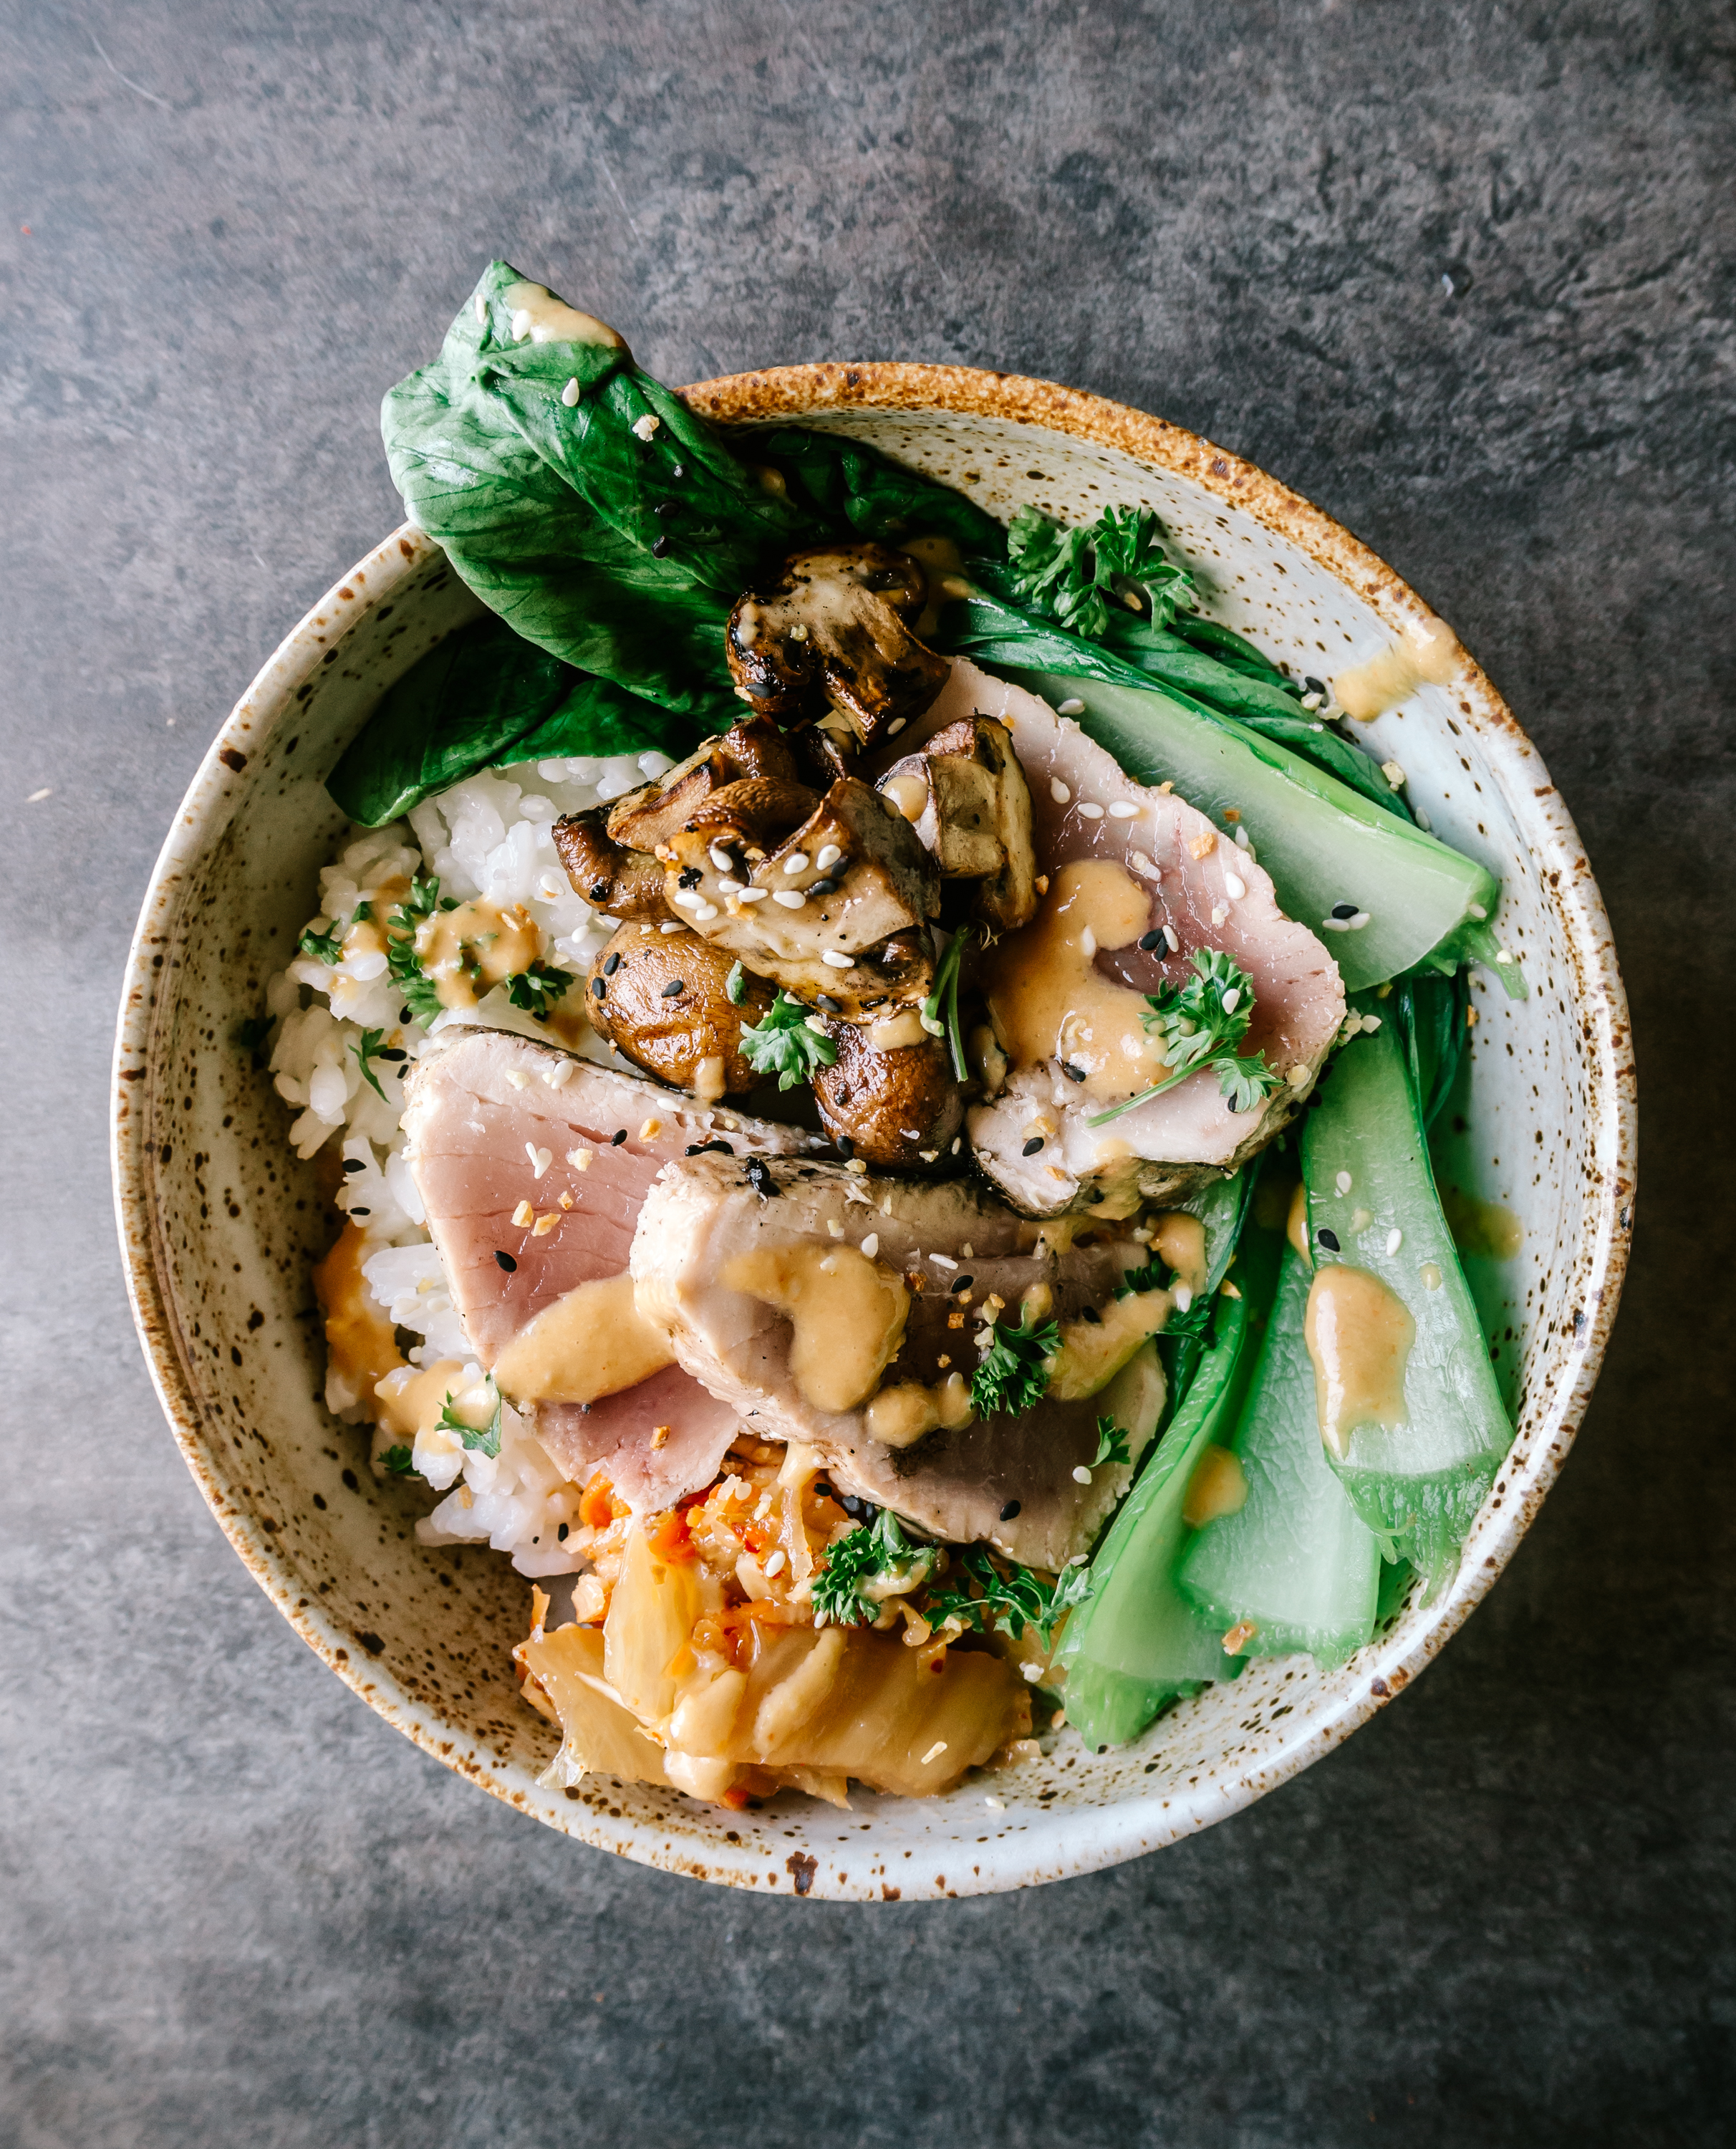 Albacore Tuna Bowls with Kimchi-Miso Sauce - Dishing Up the Dirt